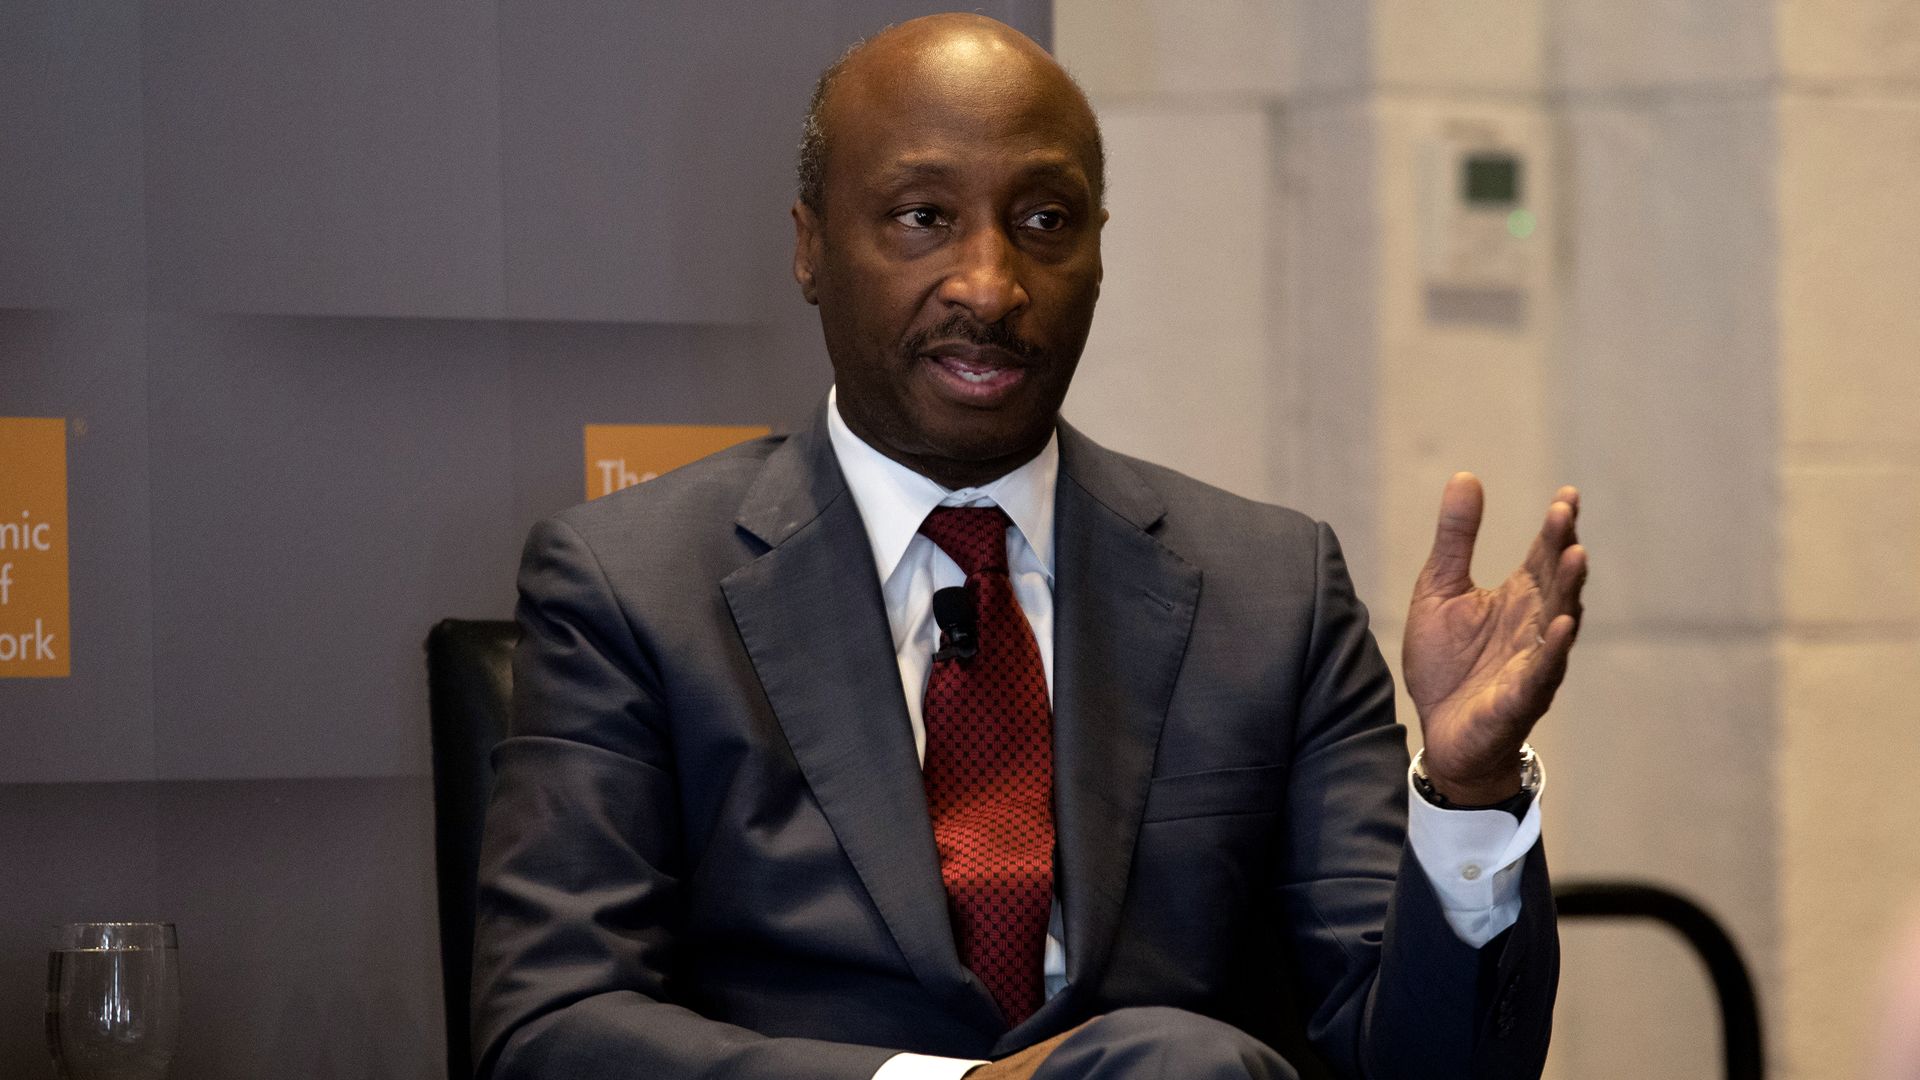 Merck CEO Ken Frazier during an interview at the Economic Club of New York